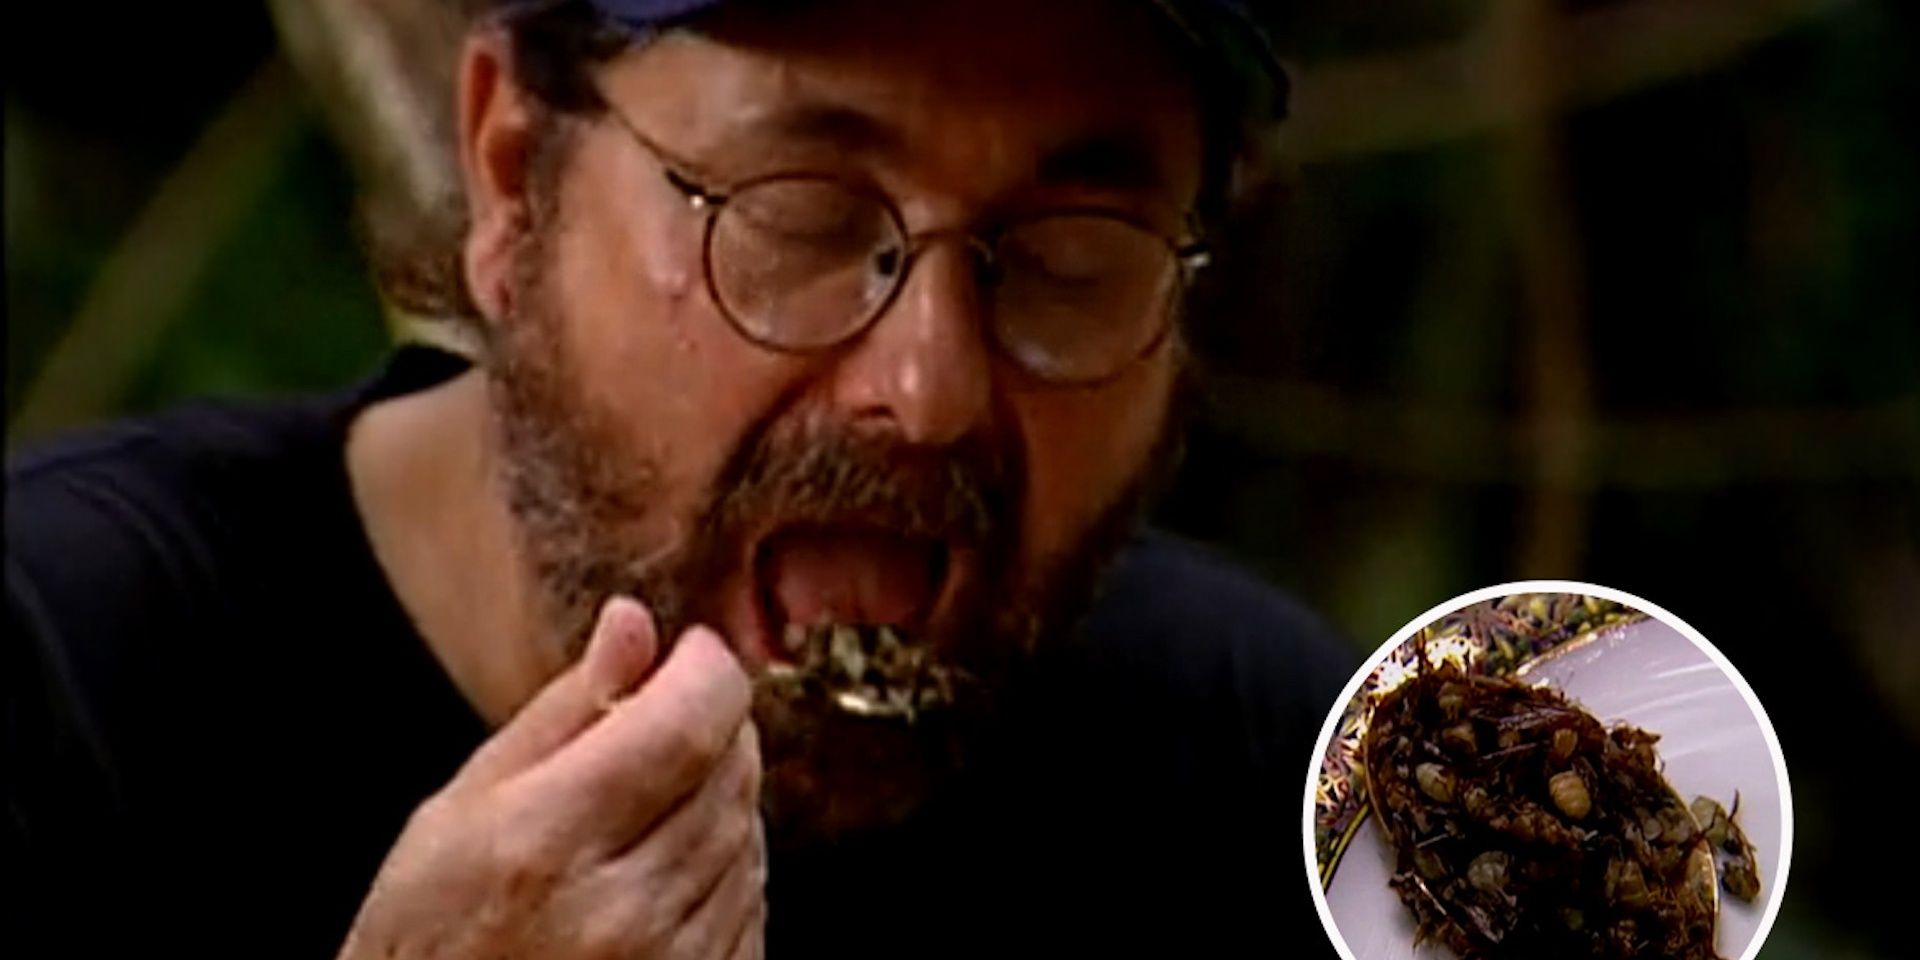 A man swallows a spoonful of ants